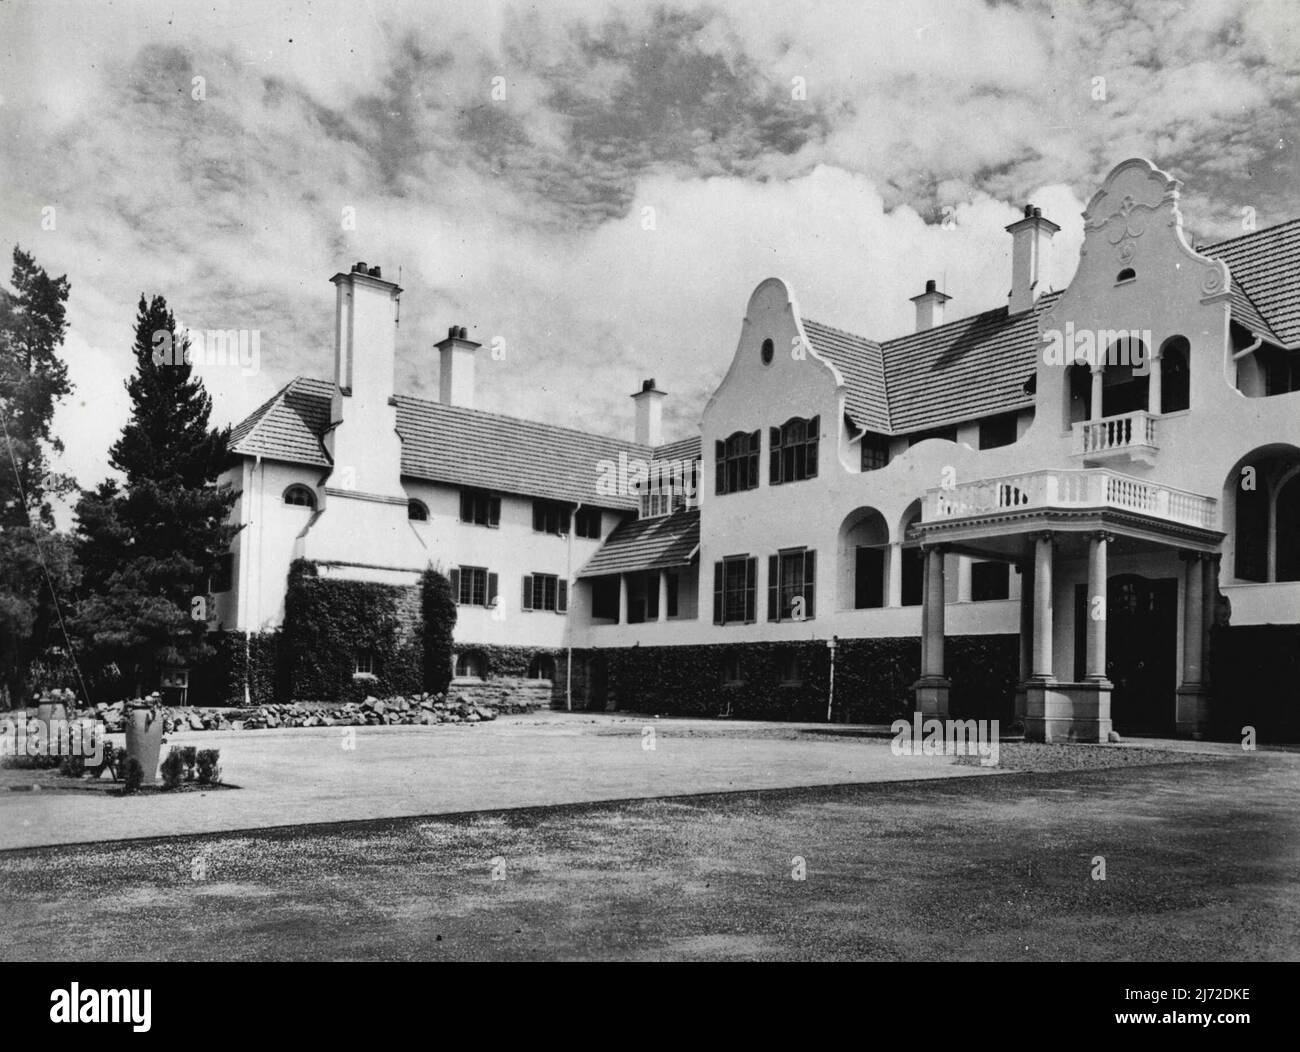 Royal Visit to South Africa -- The South Front of Government House, Pretoria, showing the main entrance to the house. Government House, Pretoria, (Architect Sir Herbert Baker), where the Royal Family will reside during their stay in Pretoria from March 29th to April 7th. January 25, 1947. (Photo by Barratt's Photo Press-Agency). Stock Photo